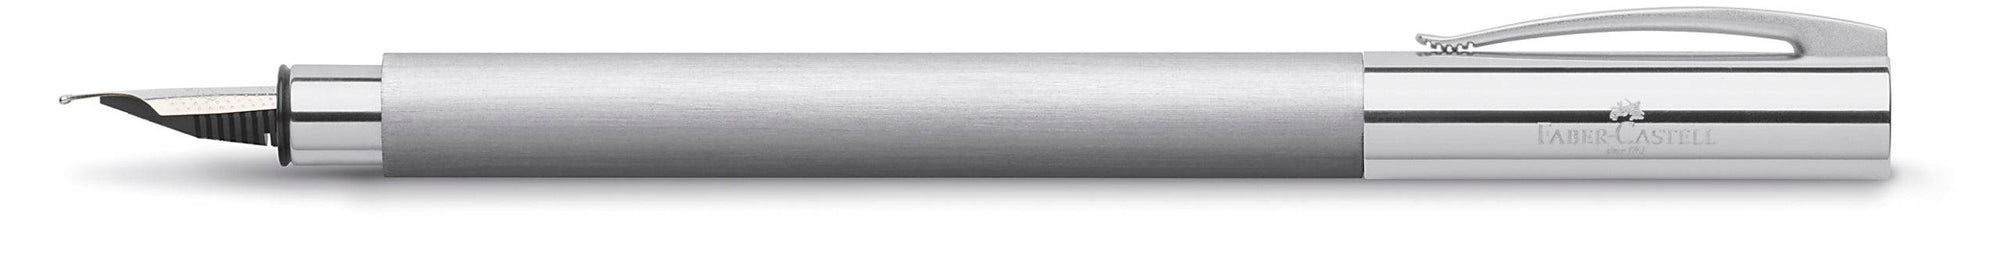 Faber-castell Ambition Stainless Steel Fountain Pen - Blesket Canada